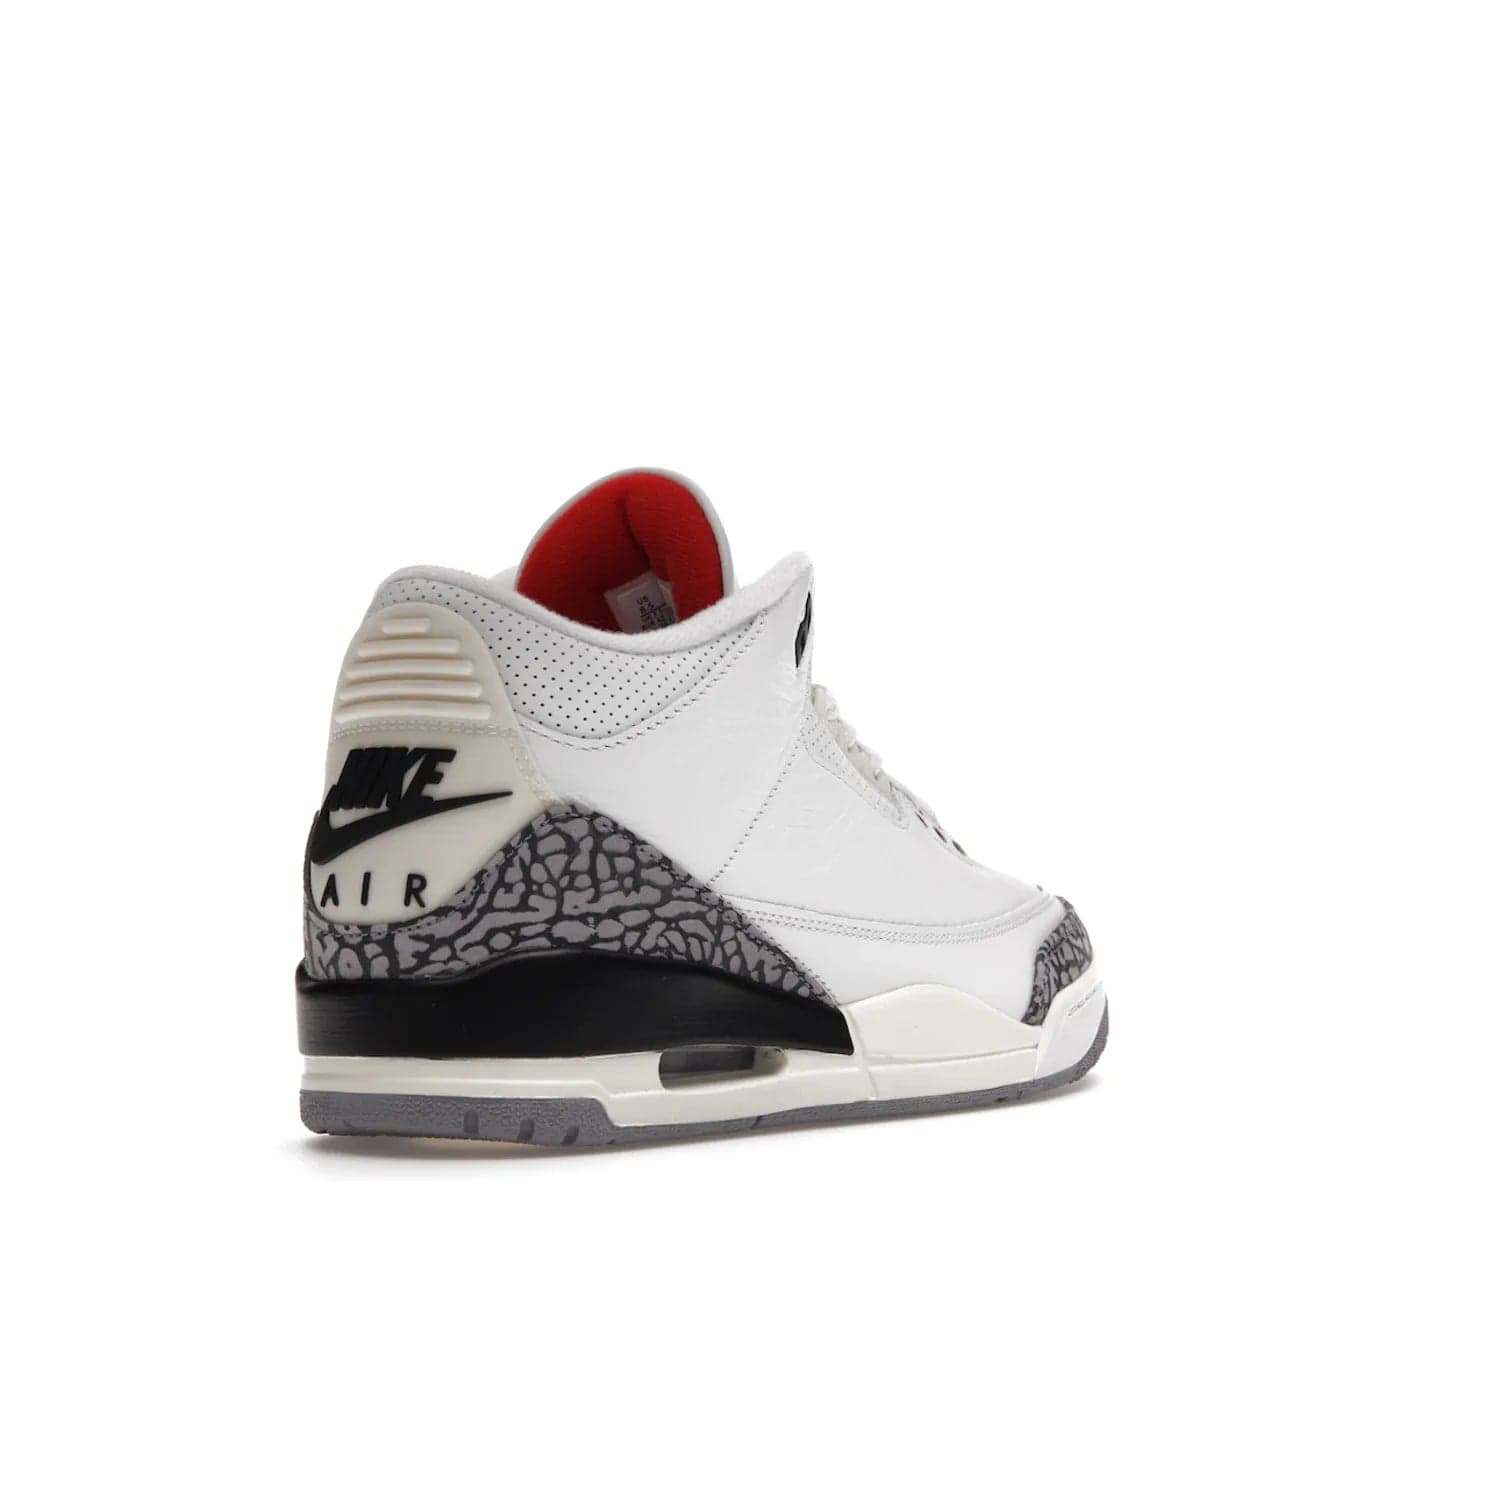 Jordan 3 Retro White Cement Reimagined - Image 32 - Only at www.BallersClubKickz.com - The Reimagined Air Jordan 3 Retro in a Summit White/Fire Red/Black/Cement Grey colorway is launching on March 11, 2023. Featuring a white leather upper, off-white midsoles and heel tabs, this vintage-look sneaker is a must-have.